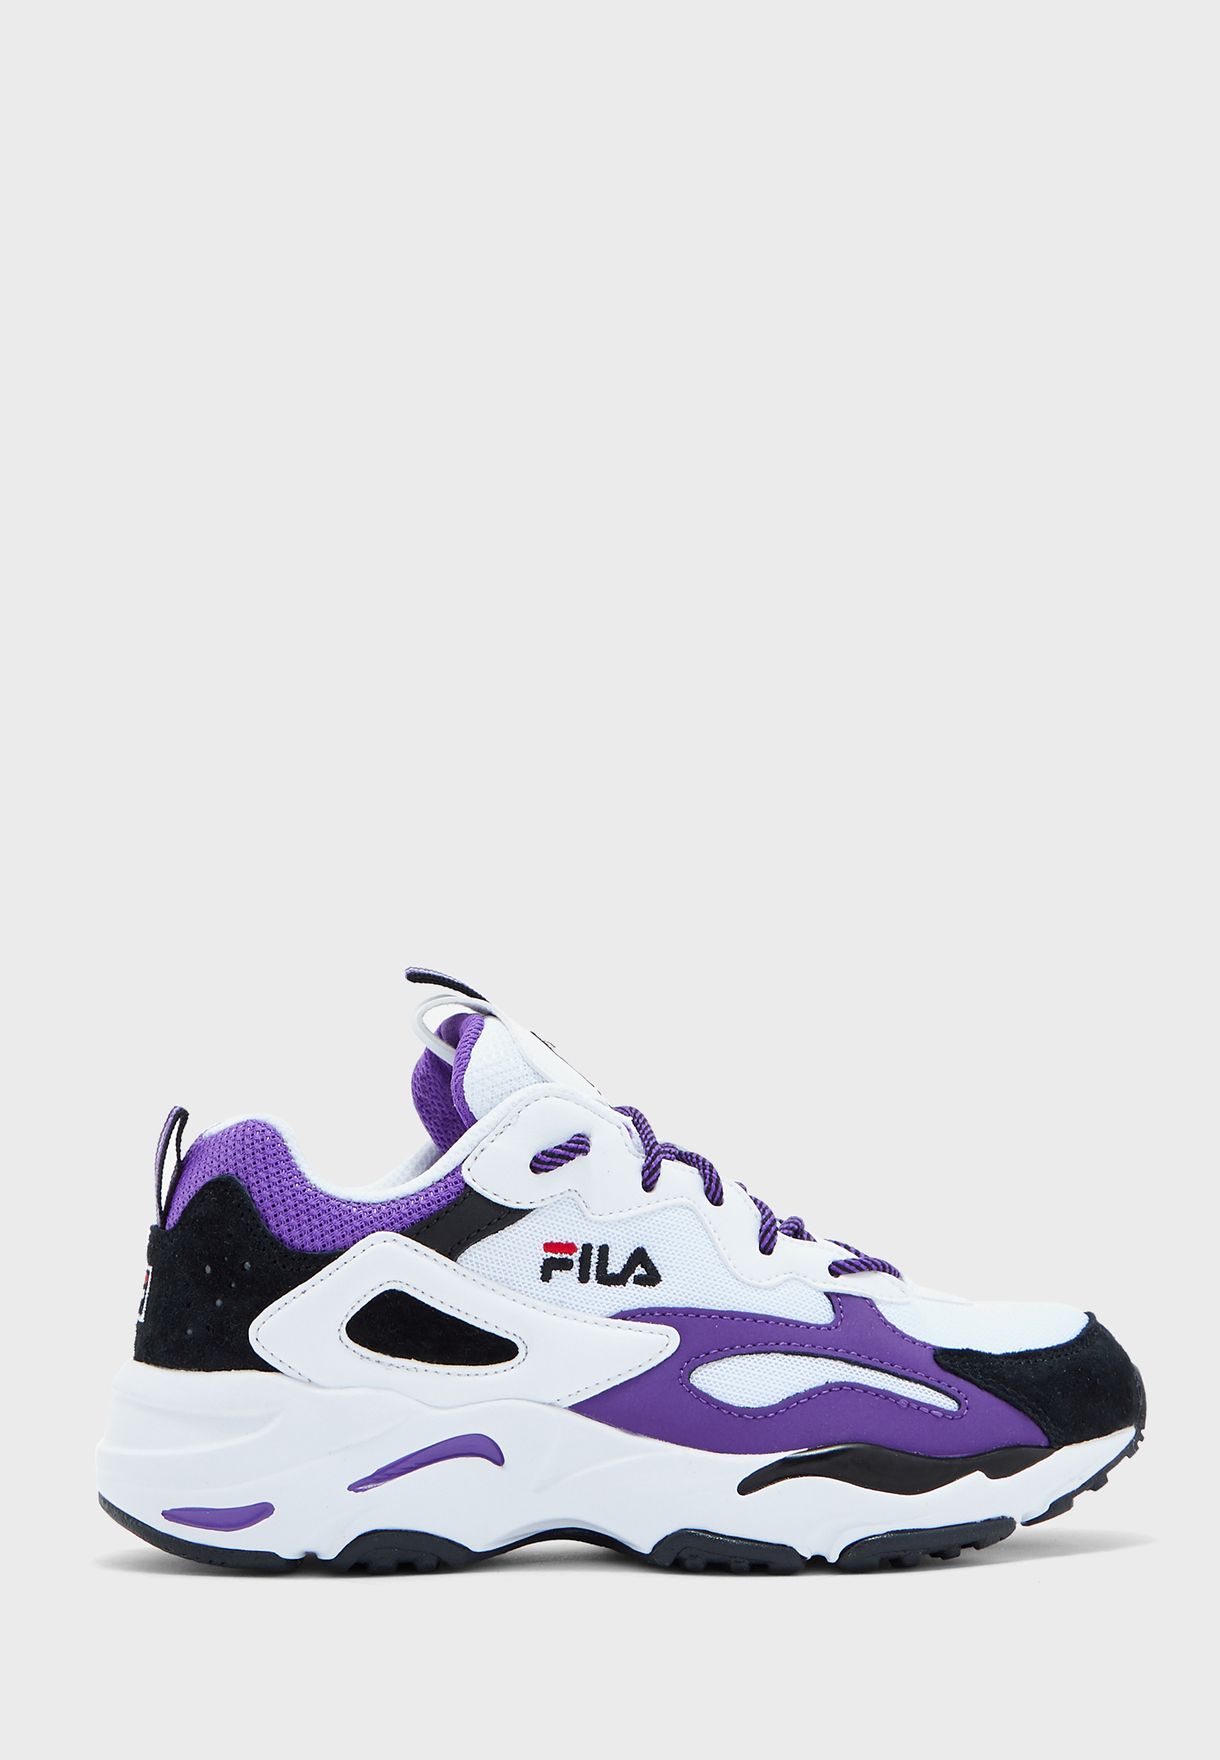 Buy Fila multicolor Ray Tracer for 